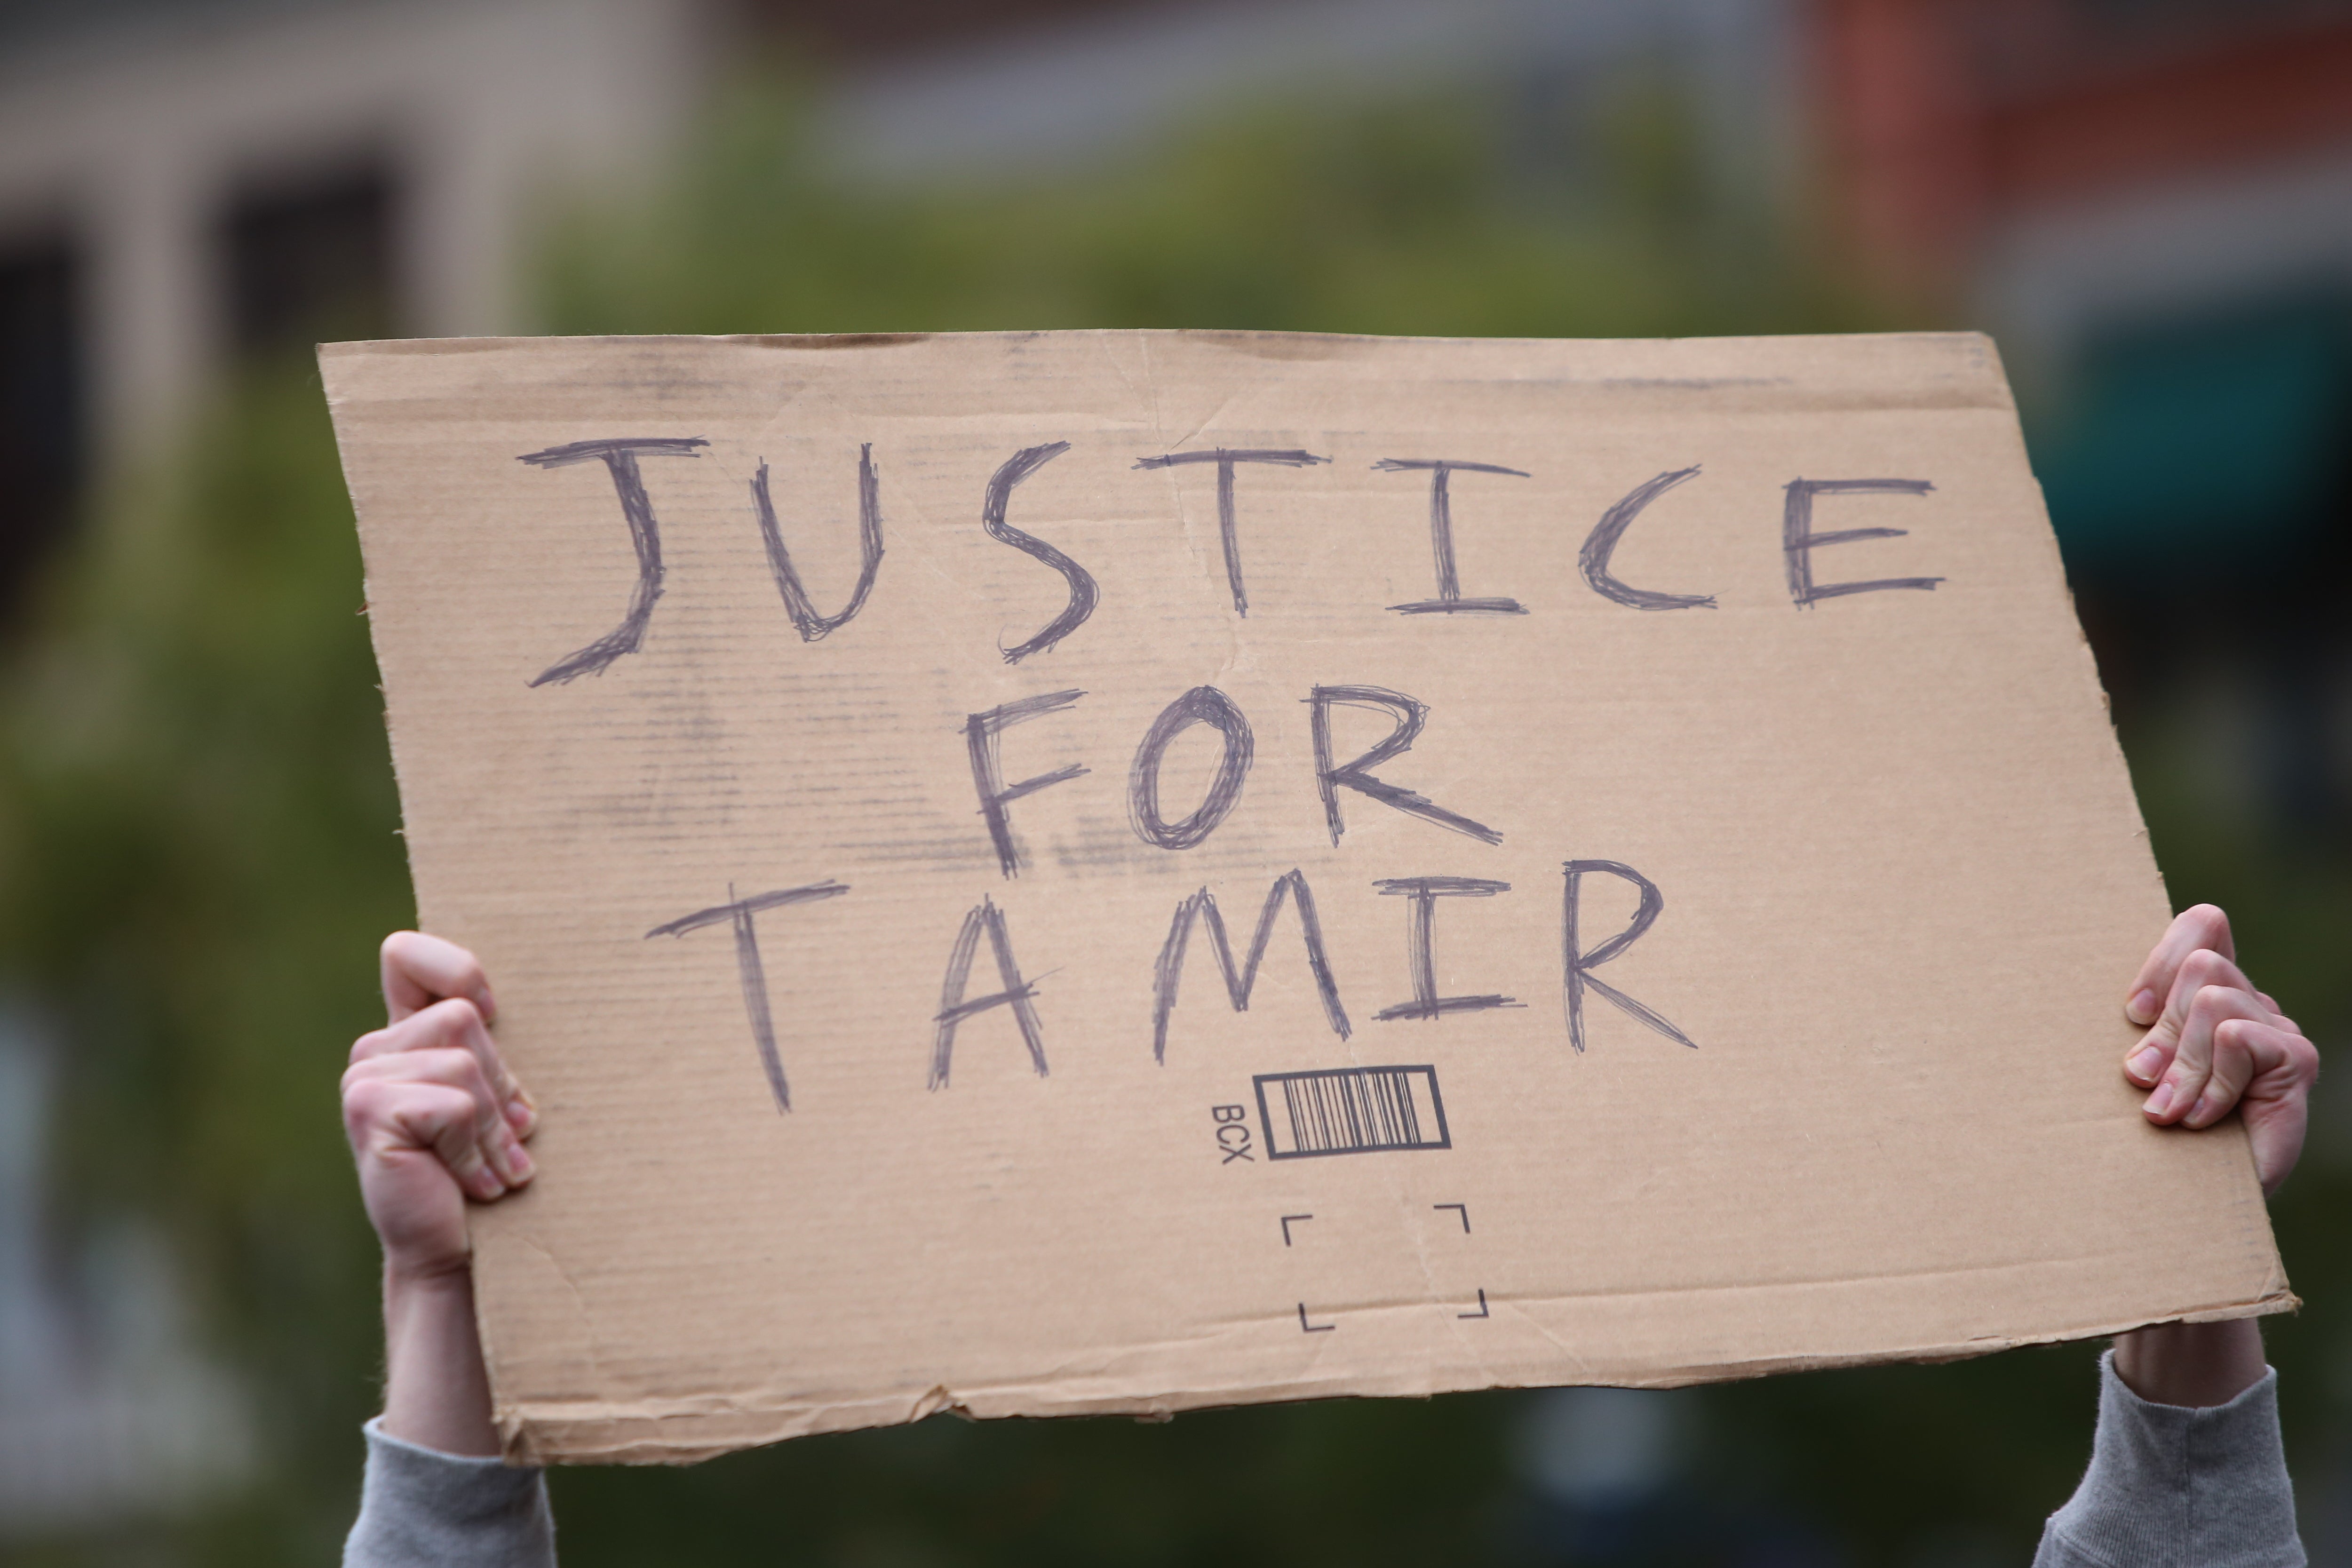 The 911 Dispatcher In Tamir Rice Case To Face Disciplinary Charges 
